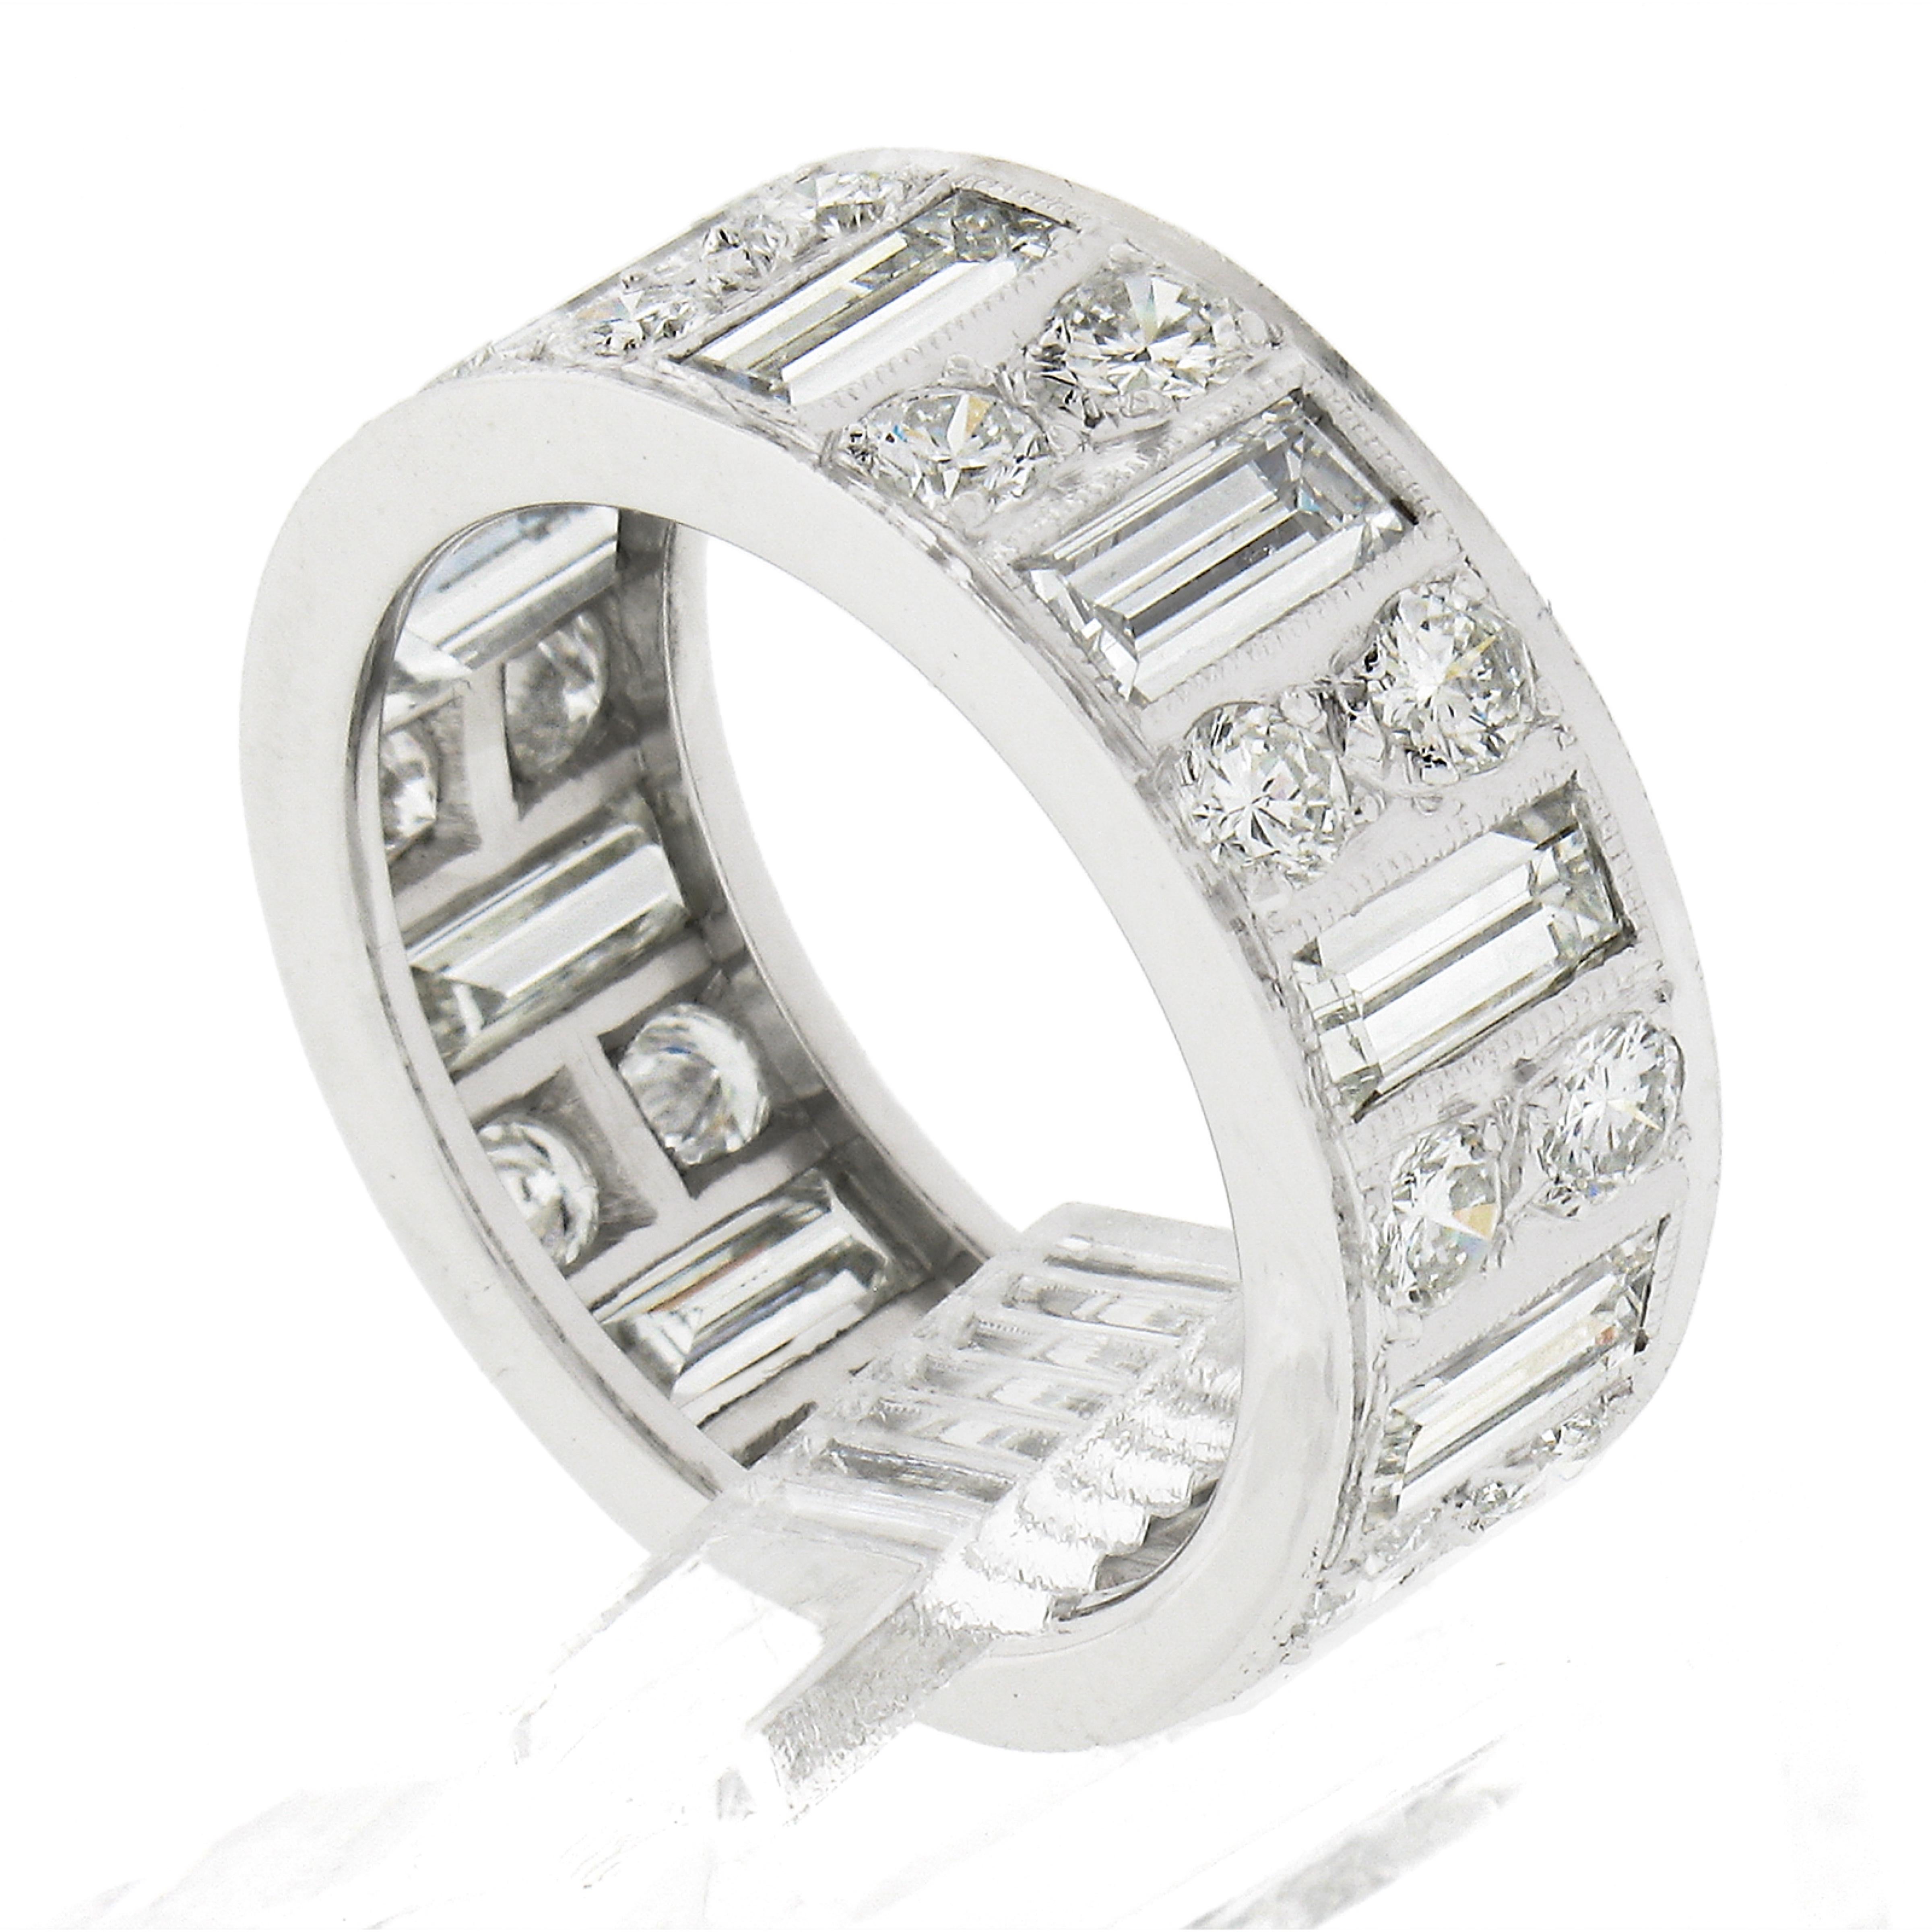 This absolutely stunning and very well made vintage diamond eternity band is crafted in solid platinum. It features very fine quality straight baguette cut diamonds neatly Milgrain bezel set that alternate with round brilliant cut pave set diamonds.